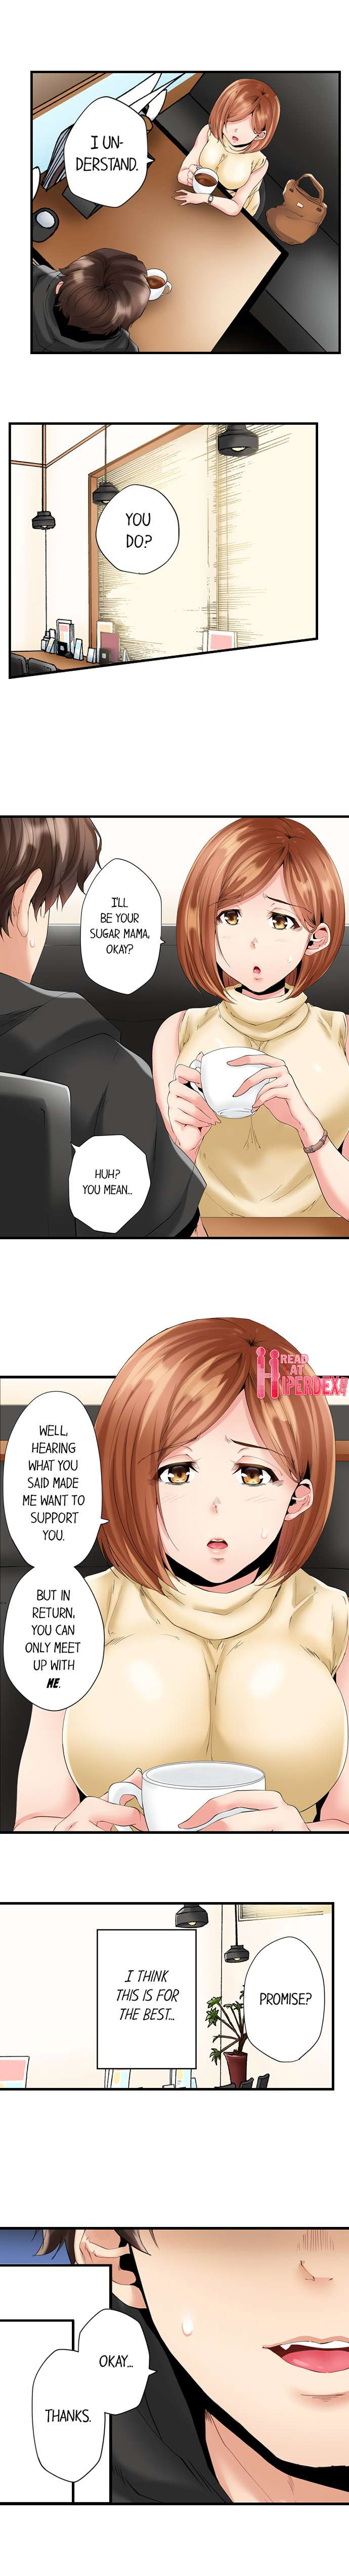 A Rebellious Girl's Sexual Instruction by Her Teacher - Chapter 2 Page 4